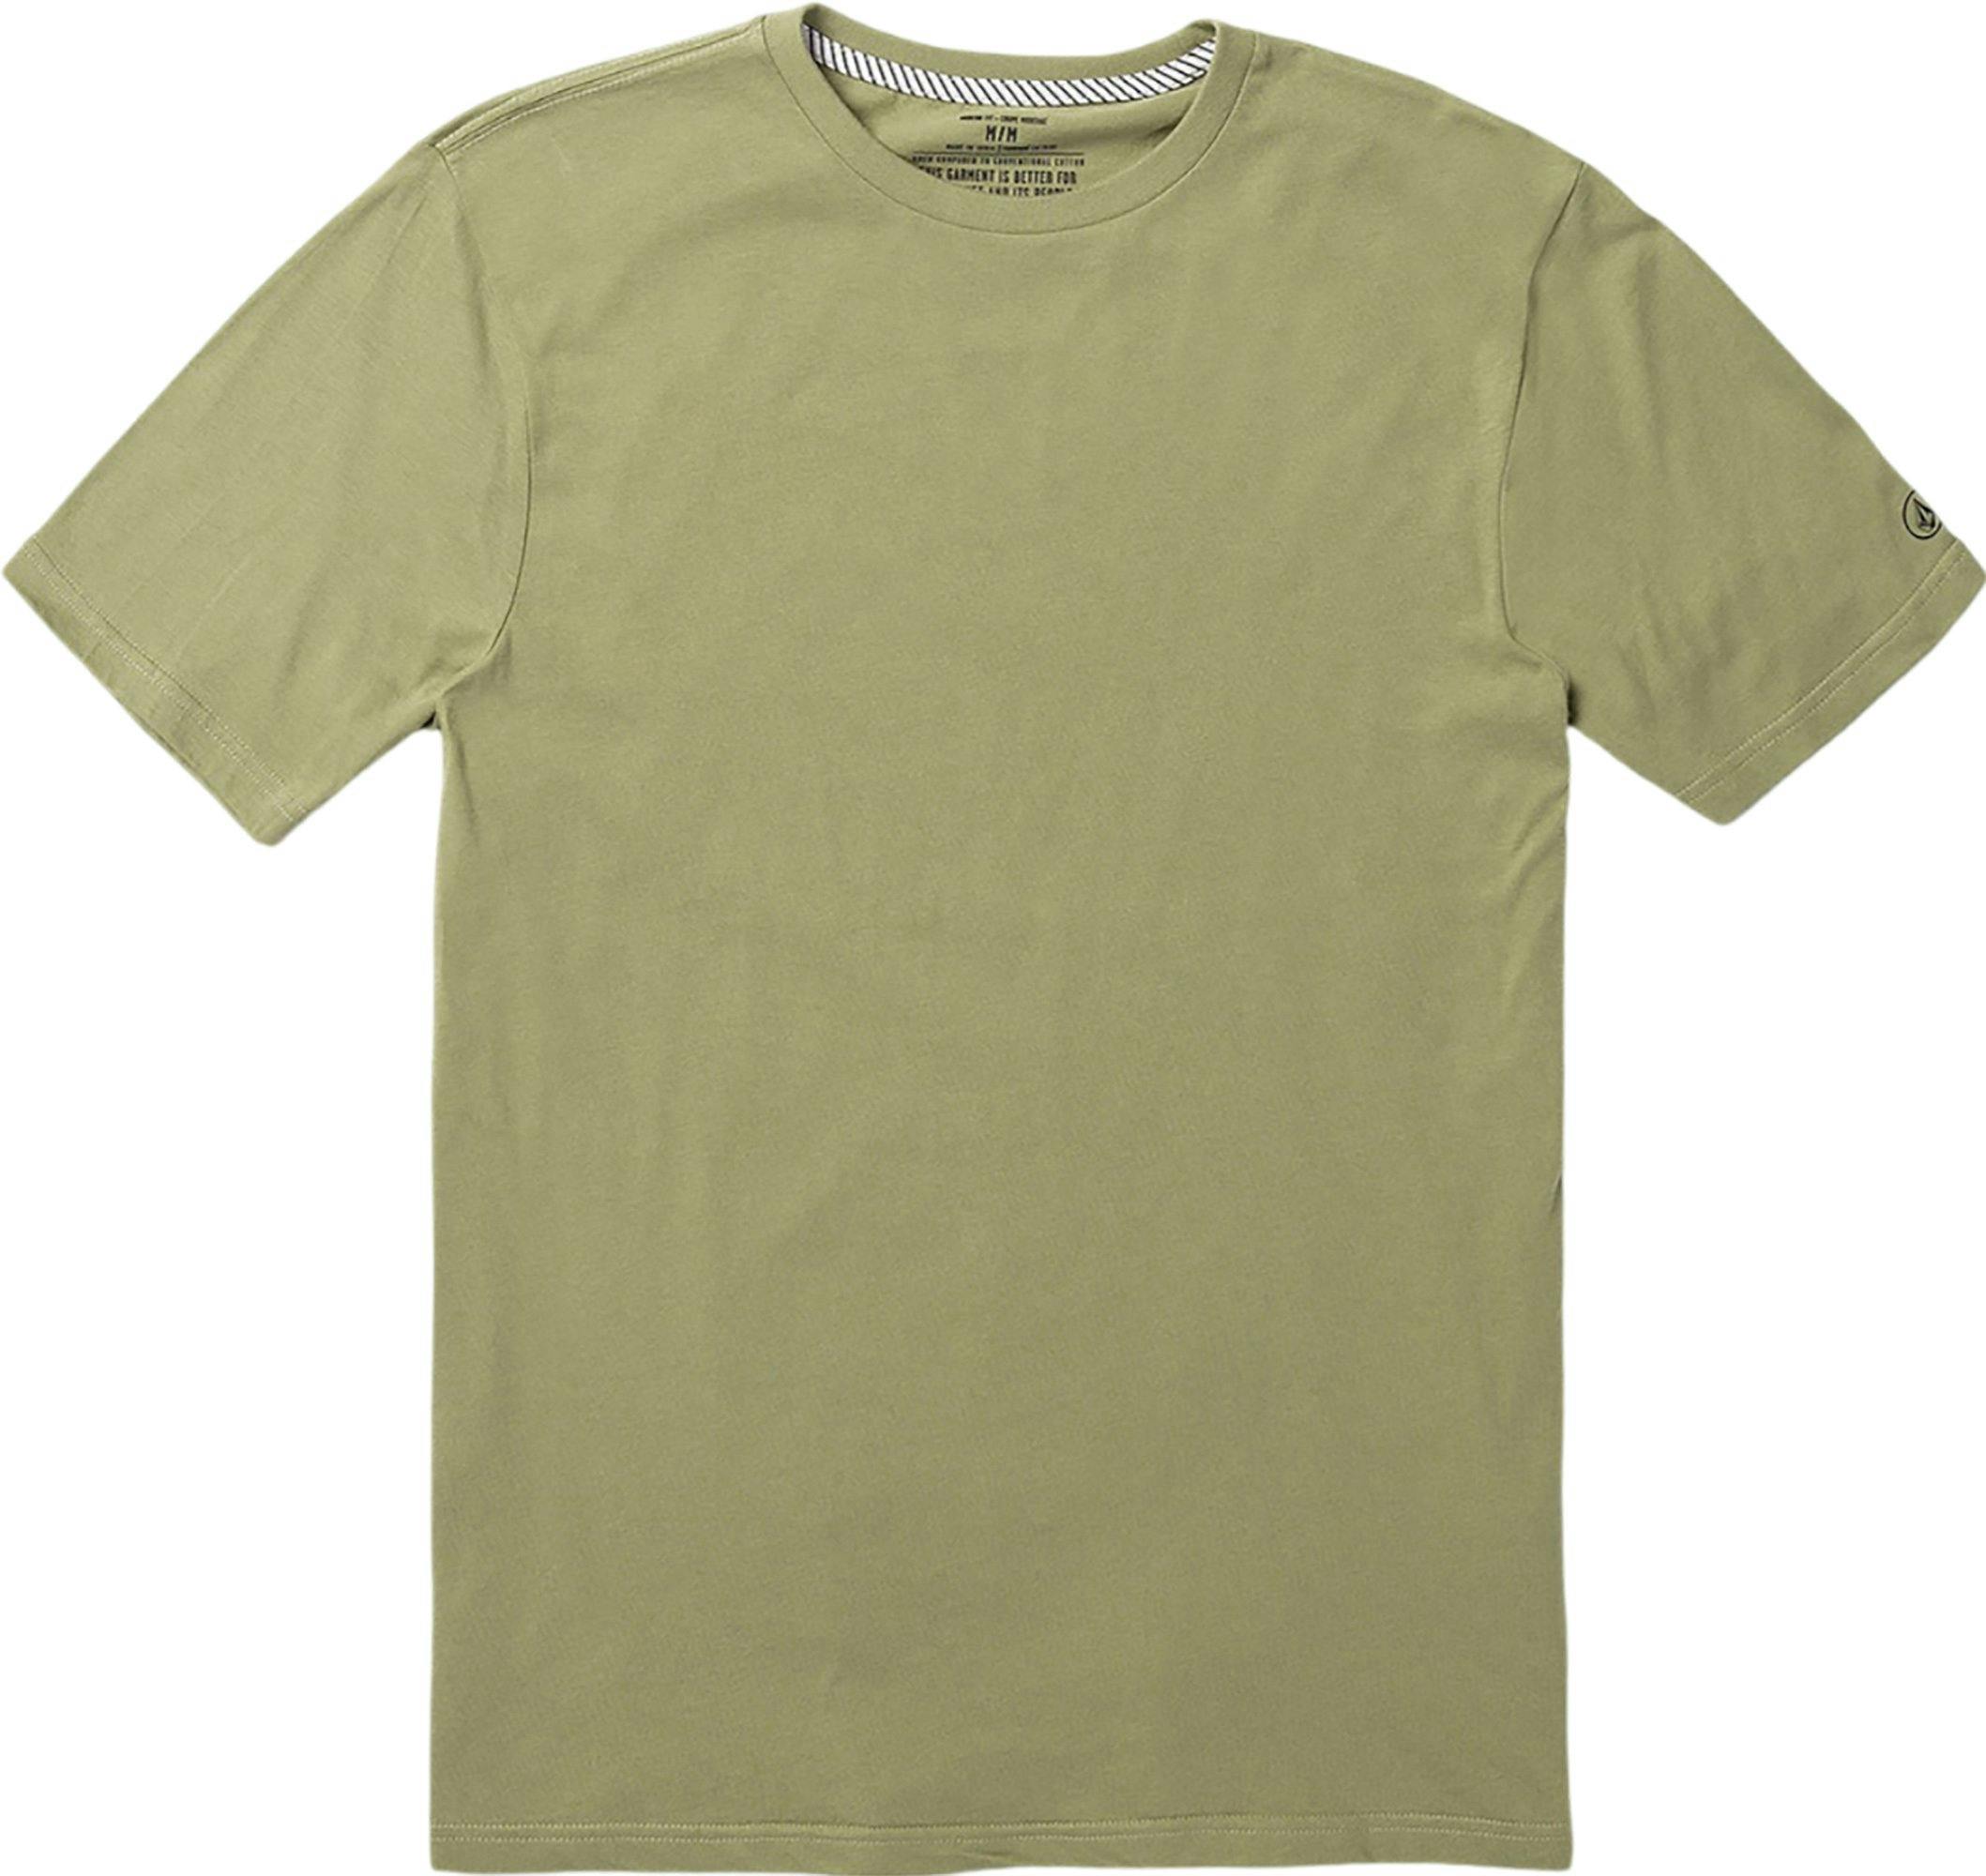 Product image for Solid Short Sleeve T-shirt - Men's